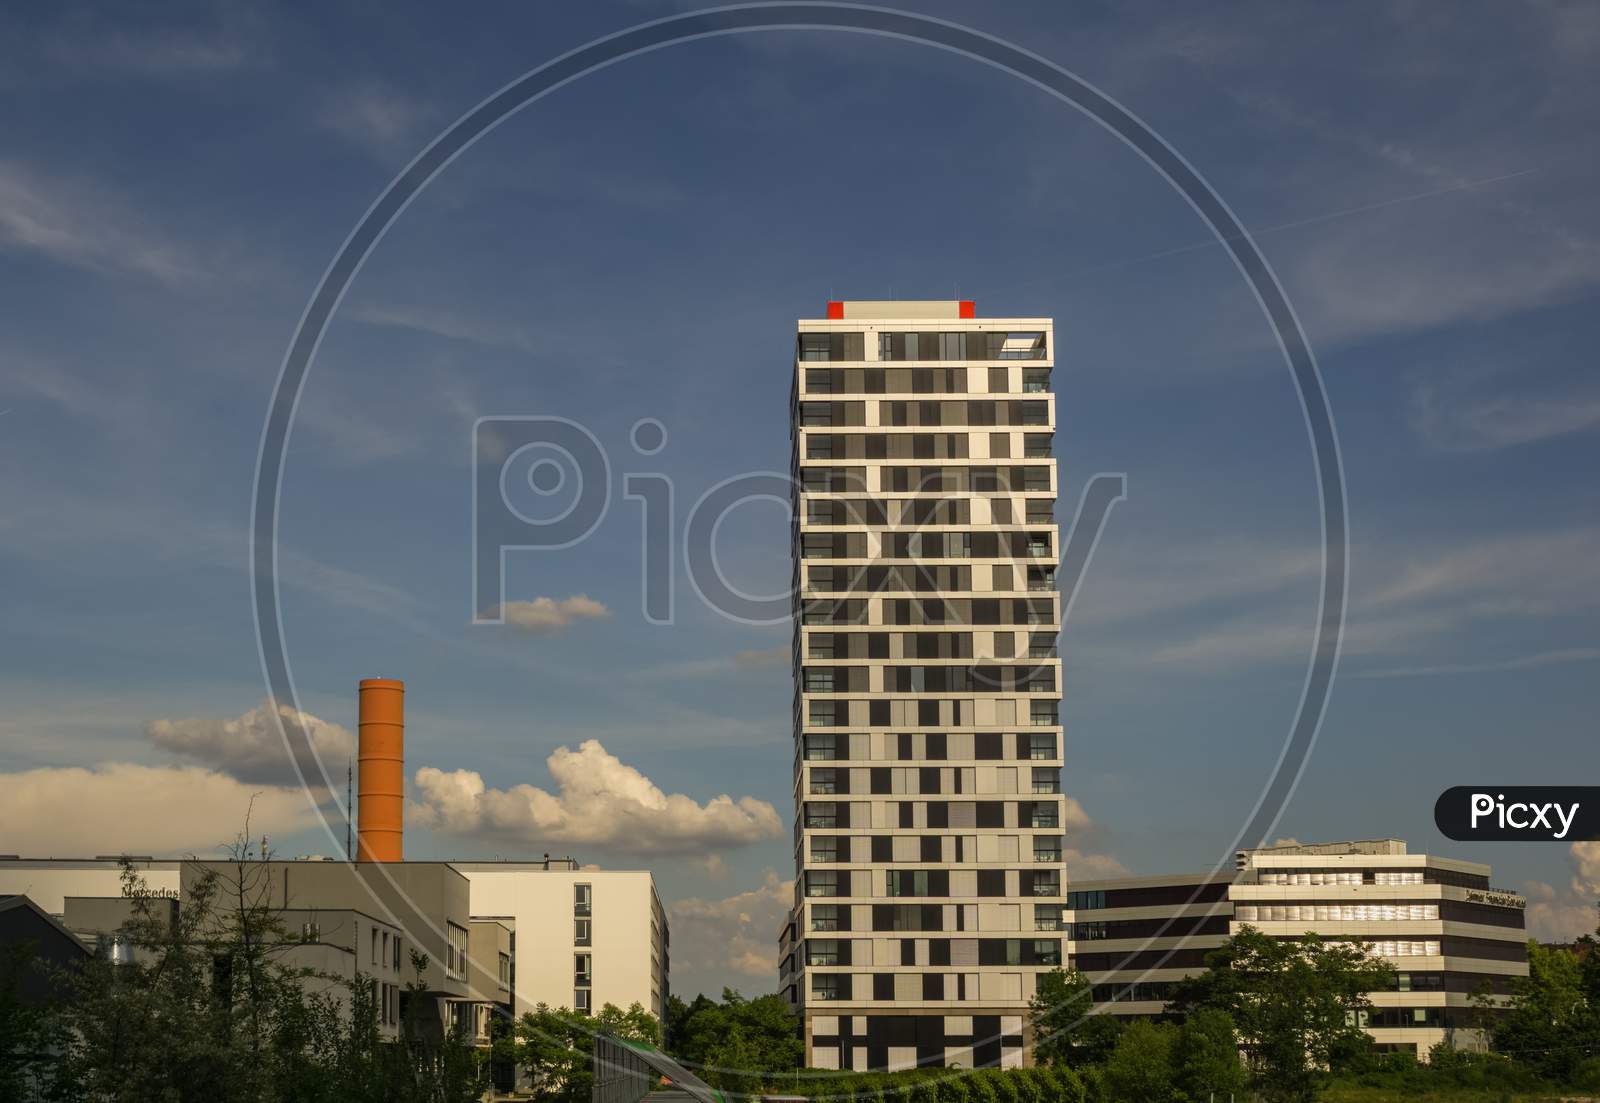 Stuttgart,Germany - May 25,2018: Skyline This Is The Biggest Apartment Building Of The City.It'S New,Modern And In Stresemannstrasse.There'S A Restaurant Inside,Too.